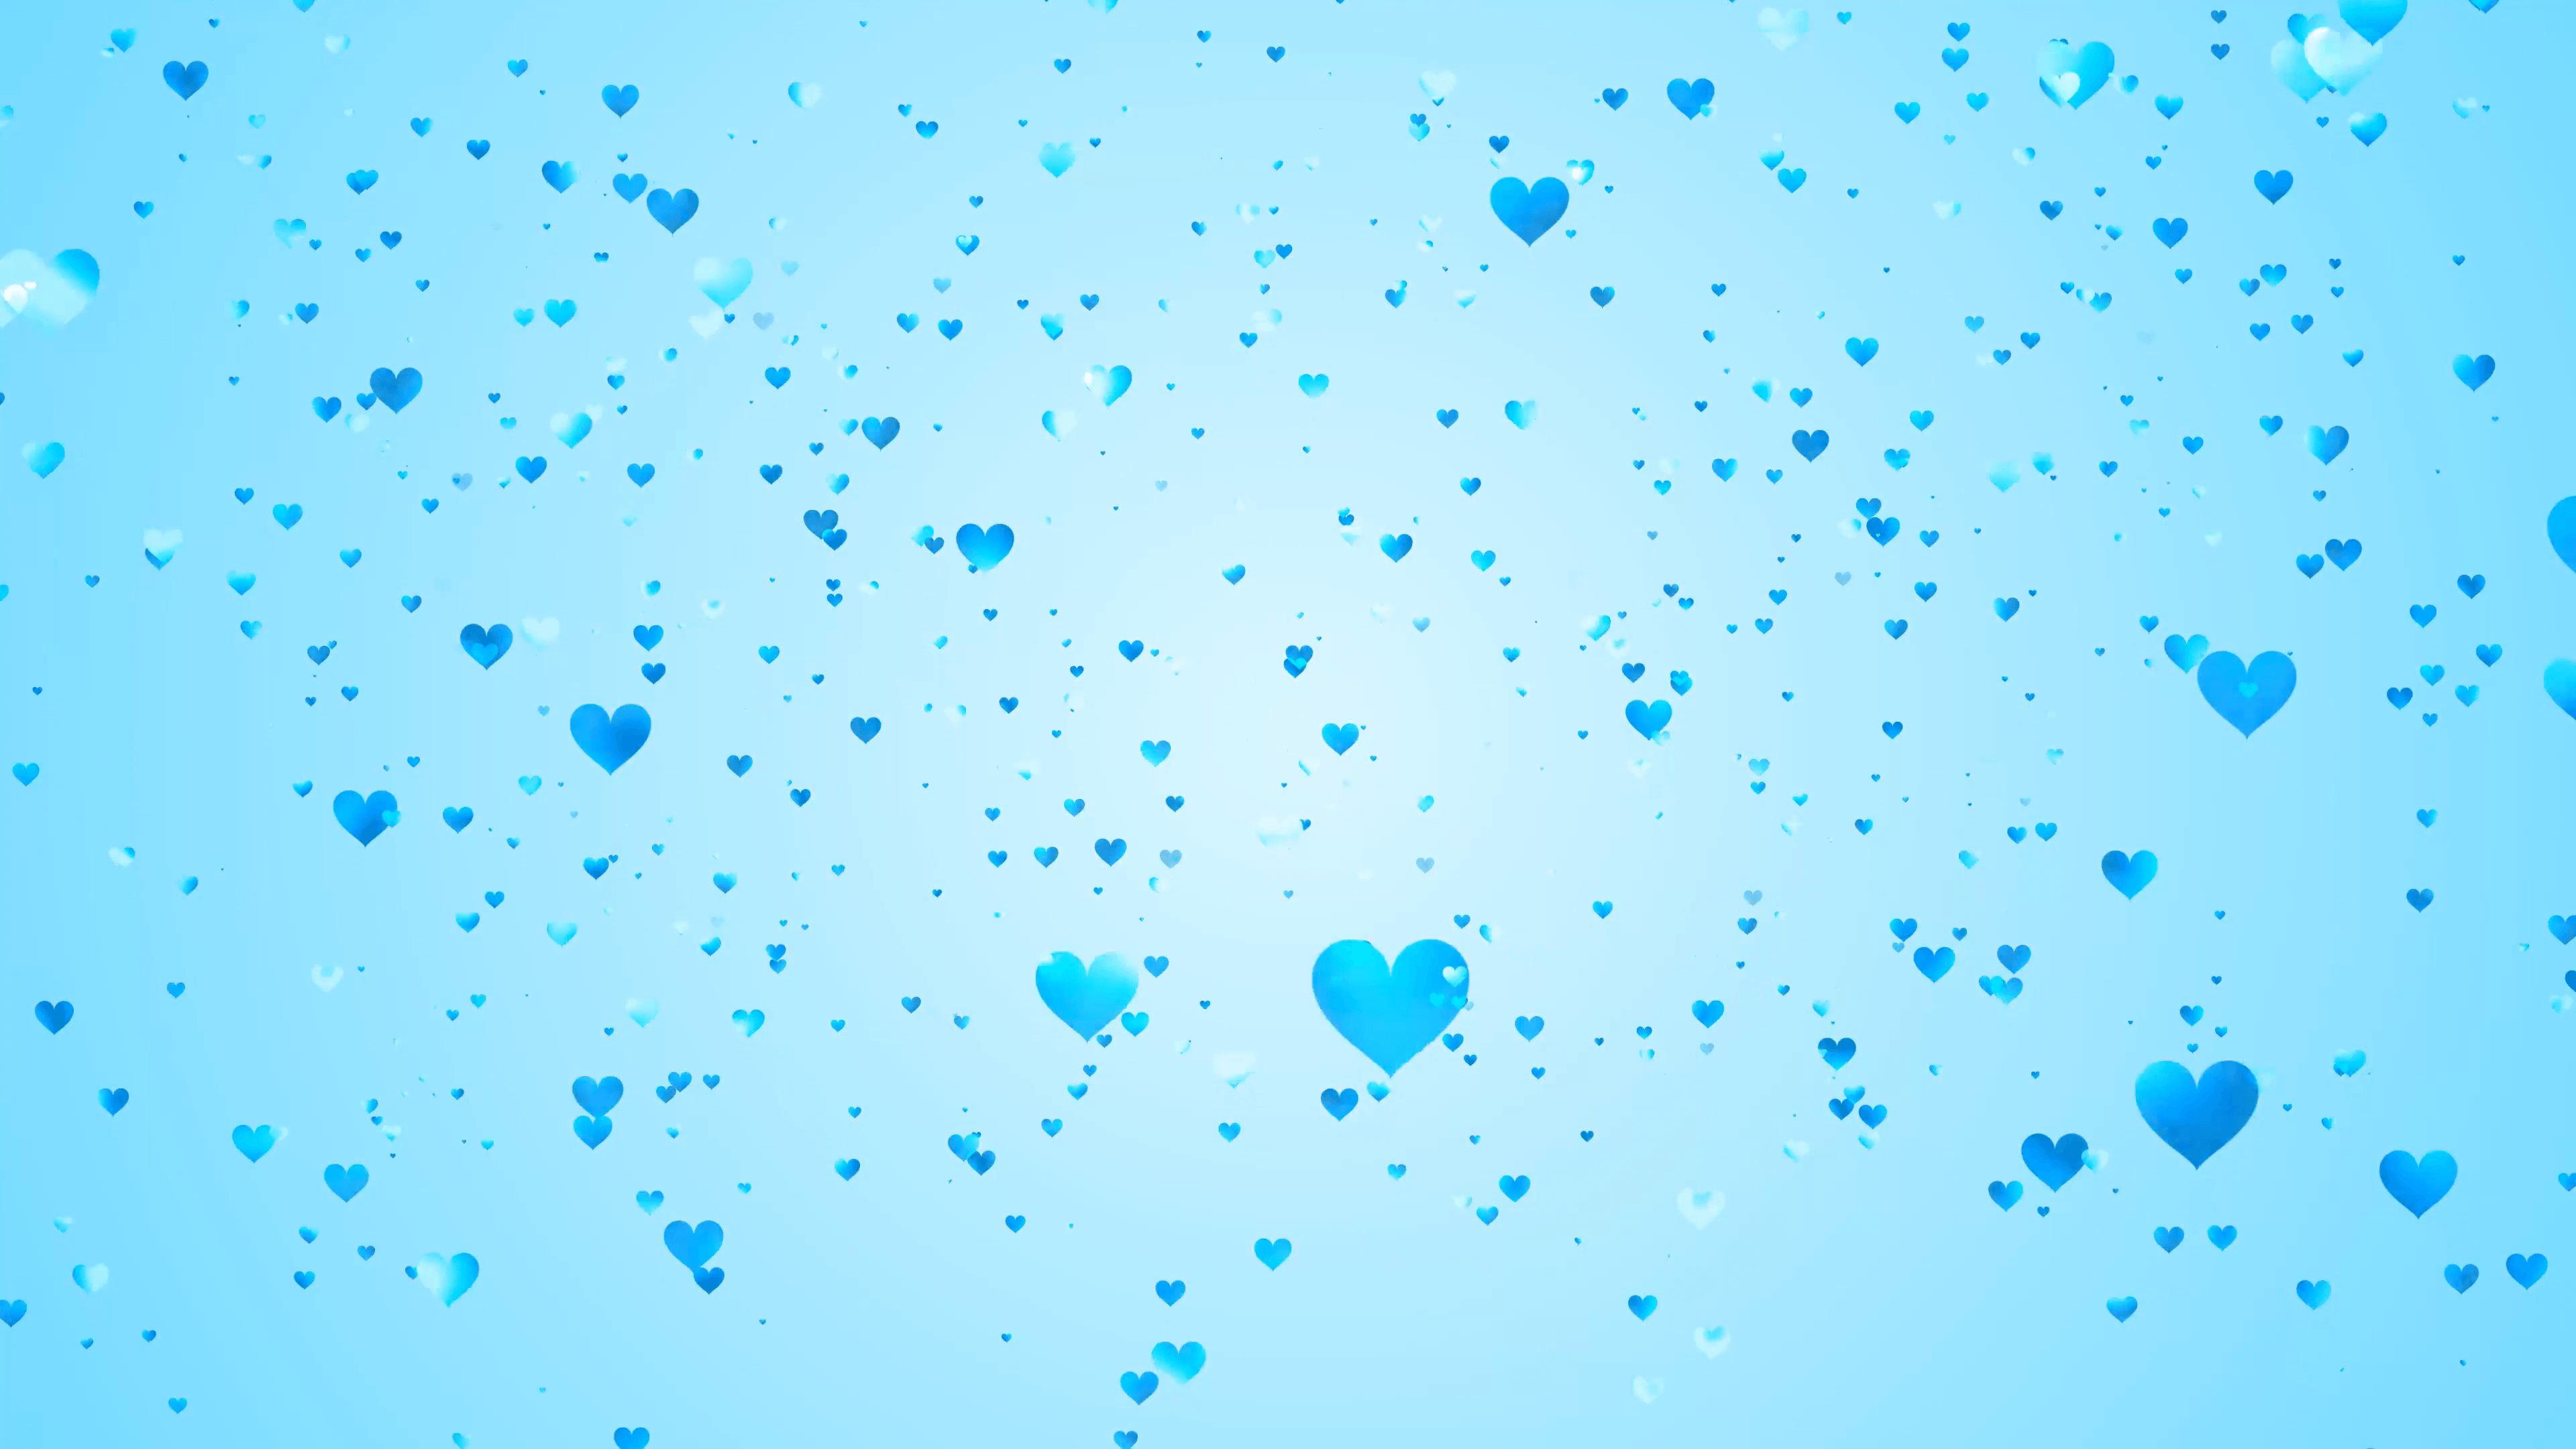 Hundreds of light blue hearts of various shades and sizes slowly